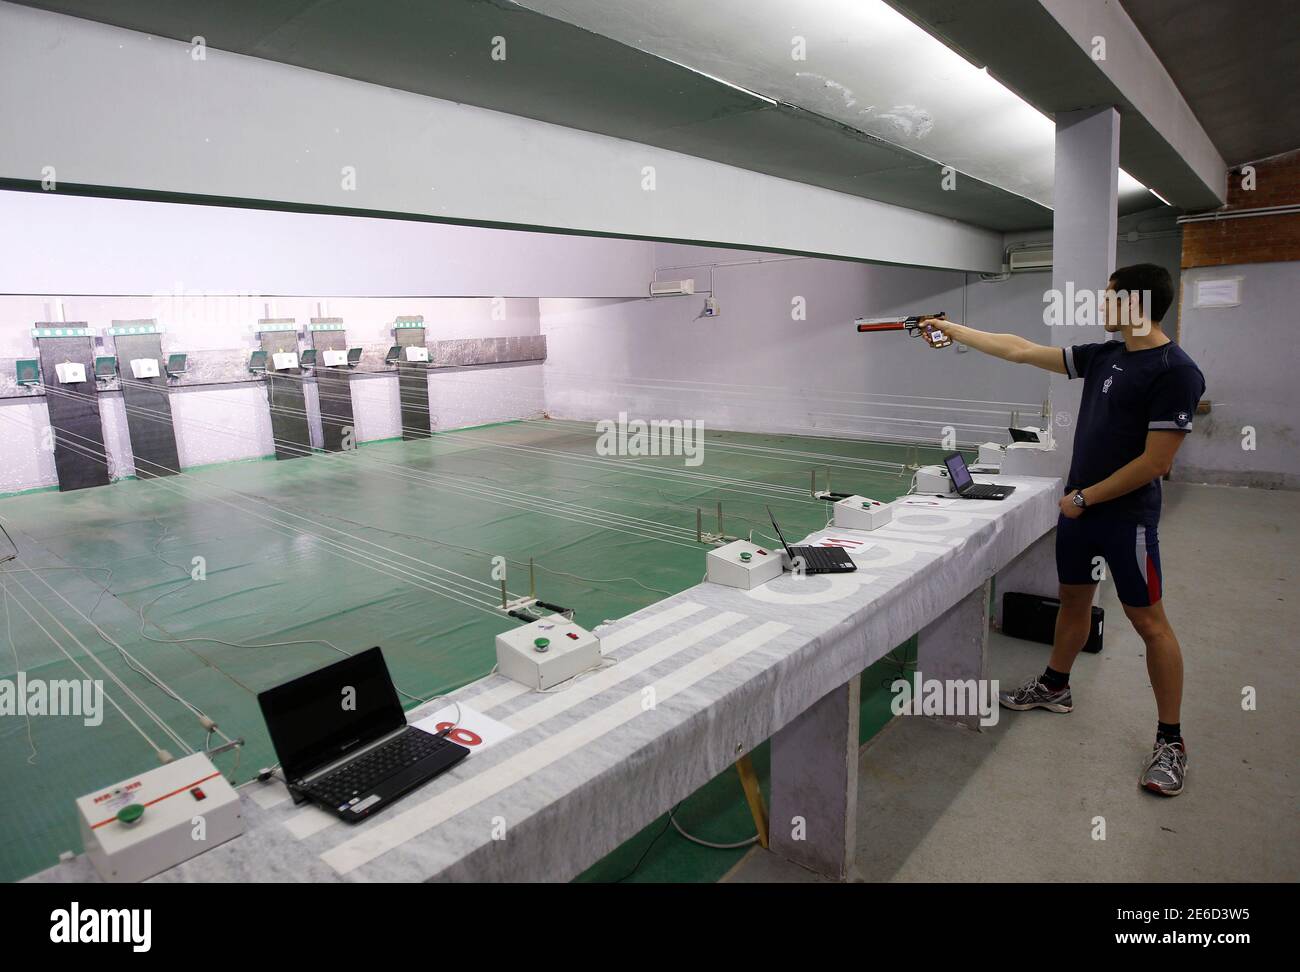 Italian pentathlon athlete Pier Paolo Petroni shoots during a training session at the shooting range in Montelibretti, outside Rome April 3, 2012. Laser guns will replace traditional air pistols in the modern pentathlon at the 2012 London Olympics.  REUTERS/Alessandro Bianchi (ITALY - Tags: SPORT OLYMPICS MODERN PENTATHLON) Stock Photo